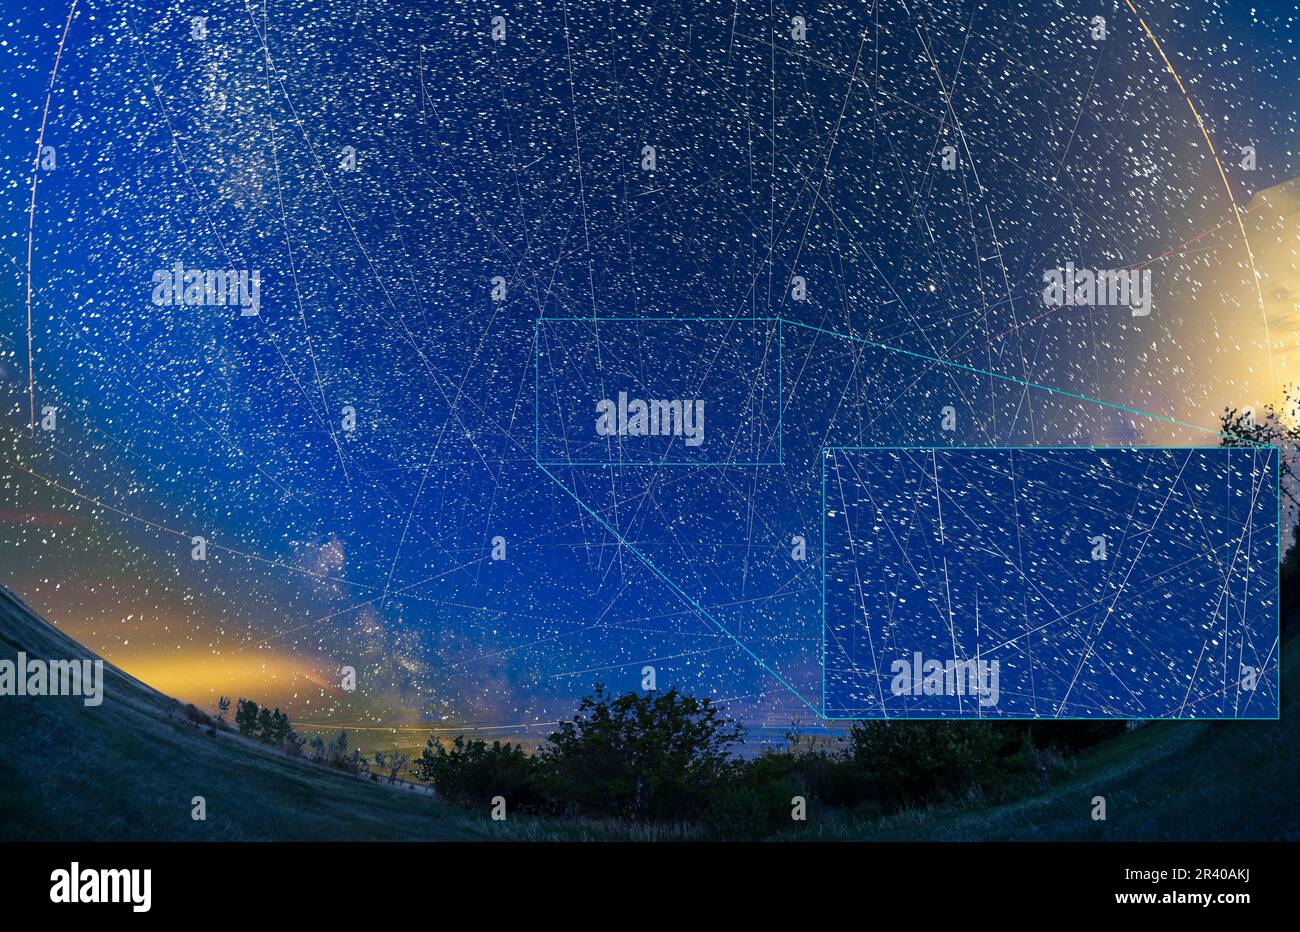 A blend of exposures showing all the satellites in a crowded sky from Alberta, Canada. Stock Photo